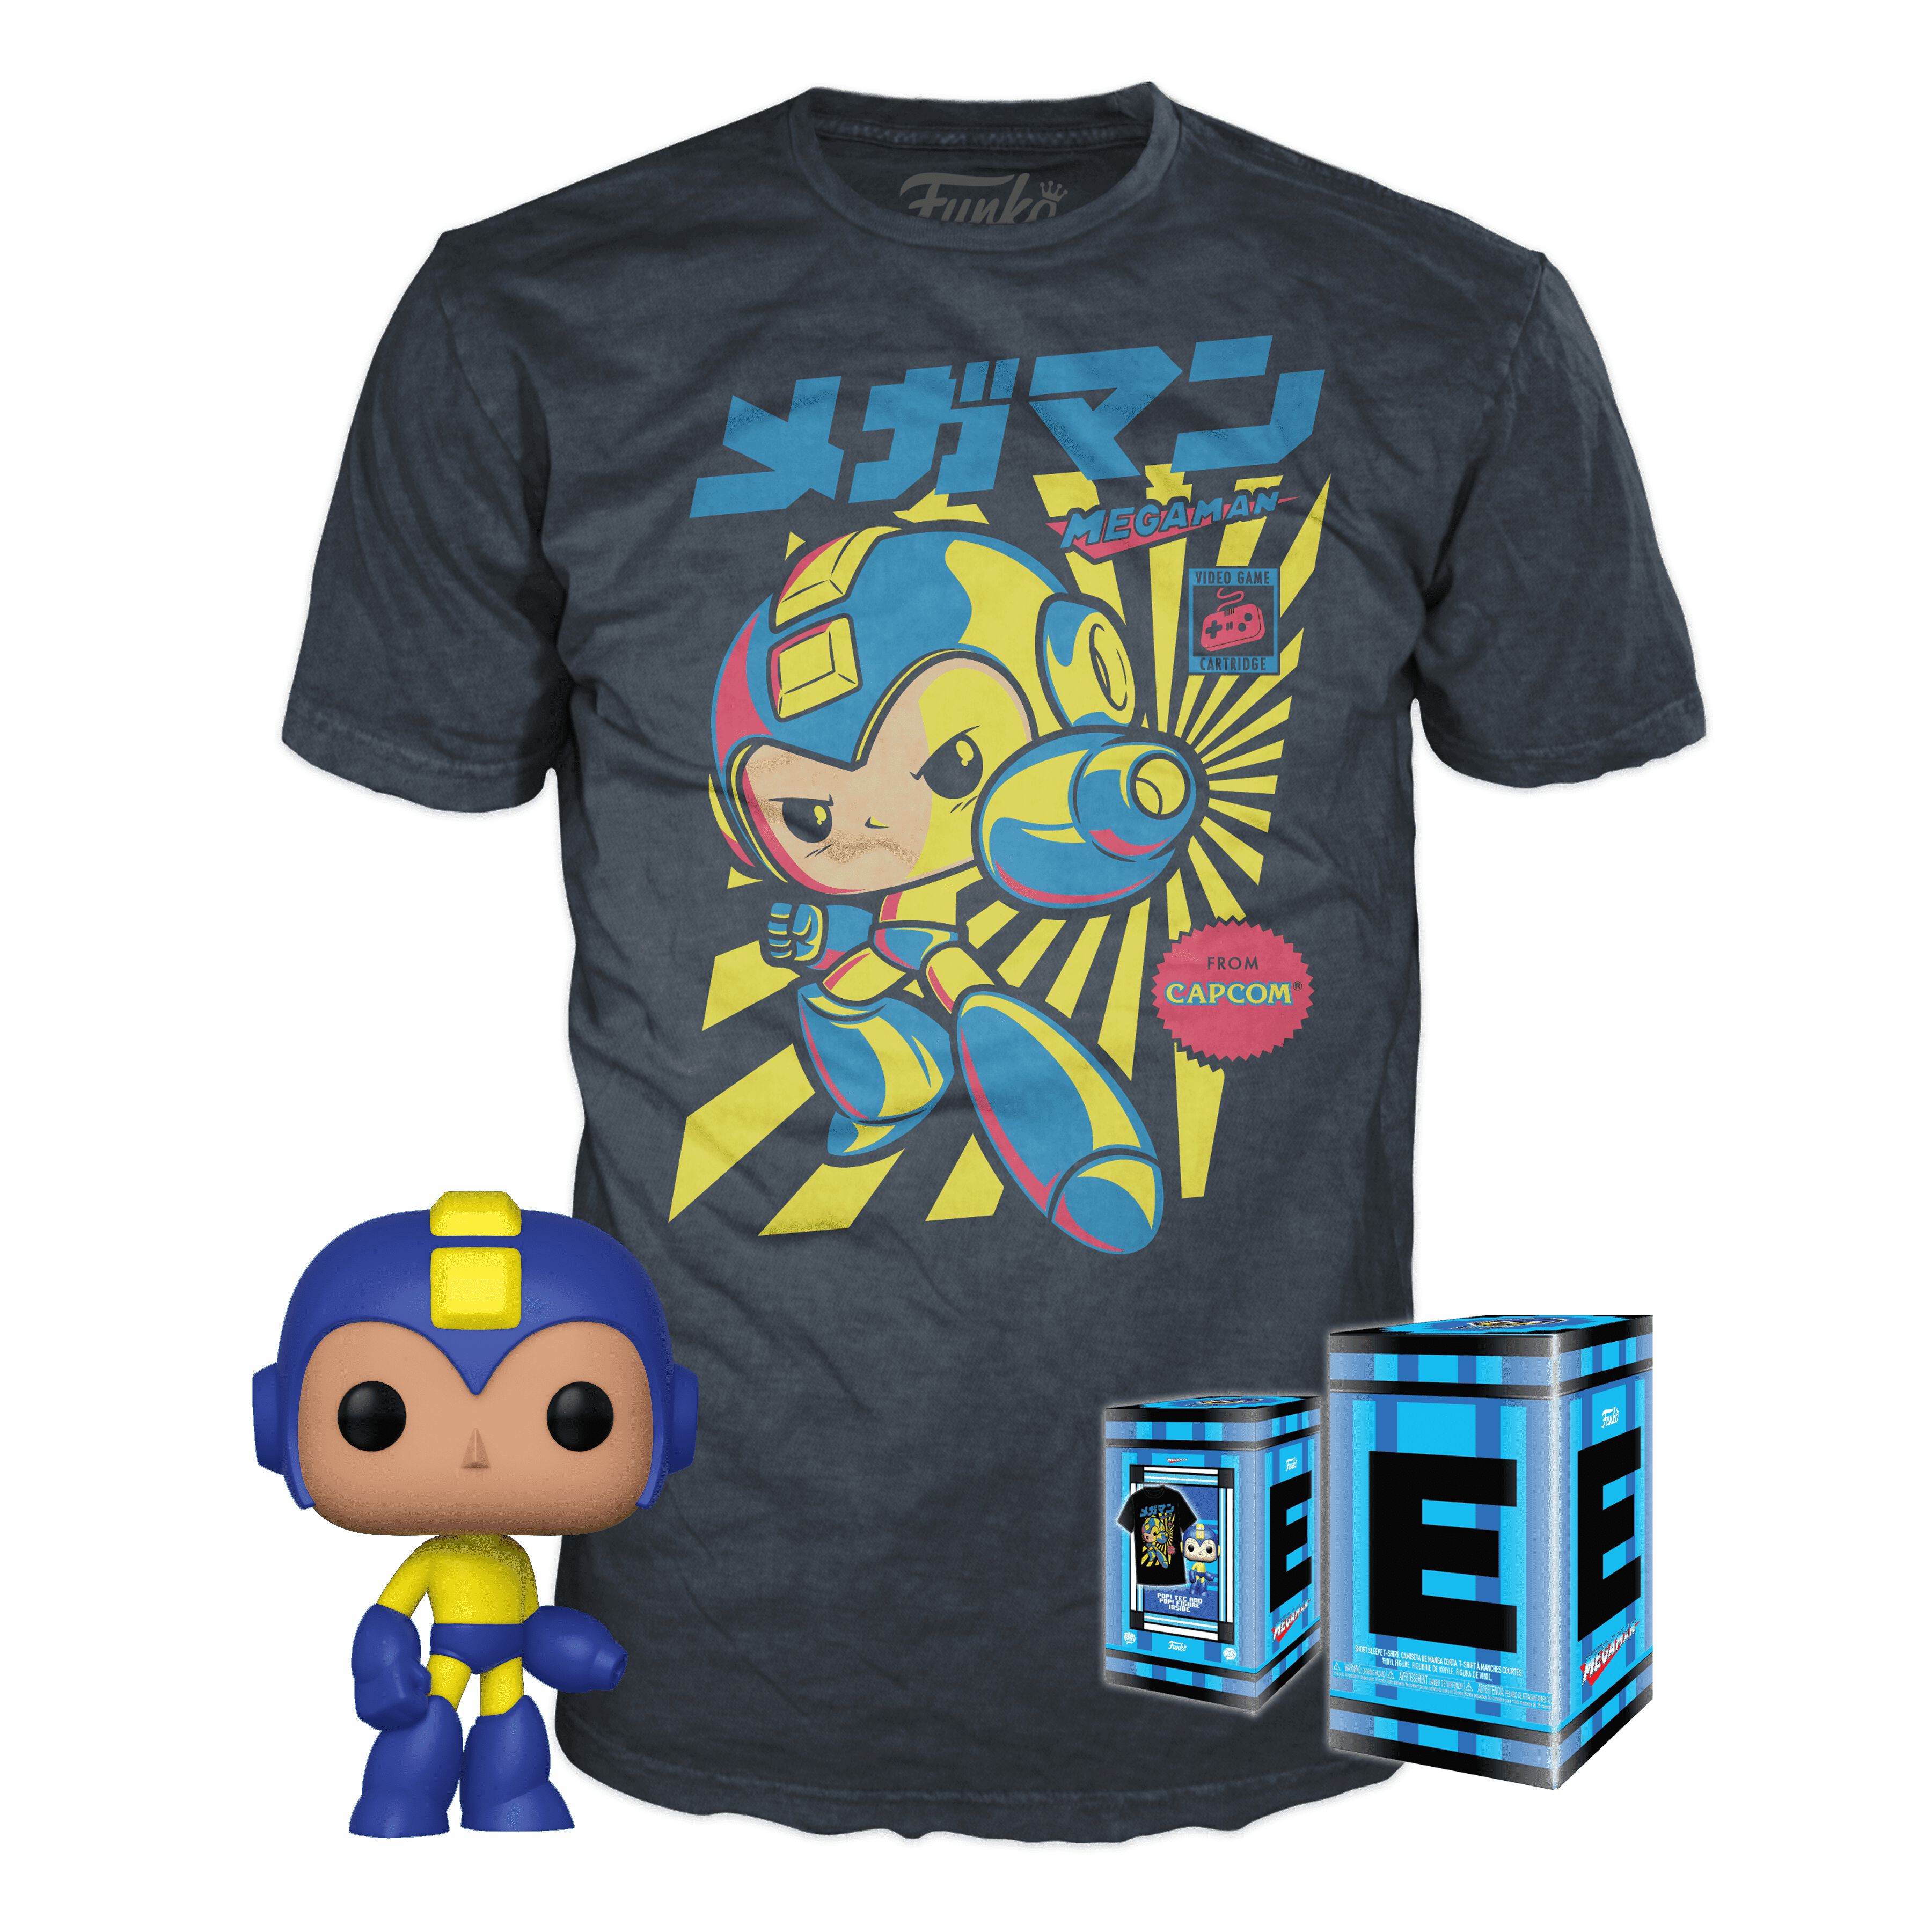 Available Now: GameStop Exclusive Mega Man Pop! and Tee!